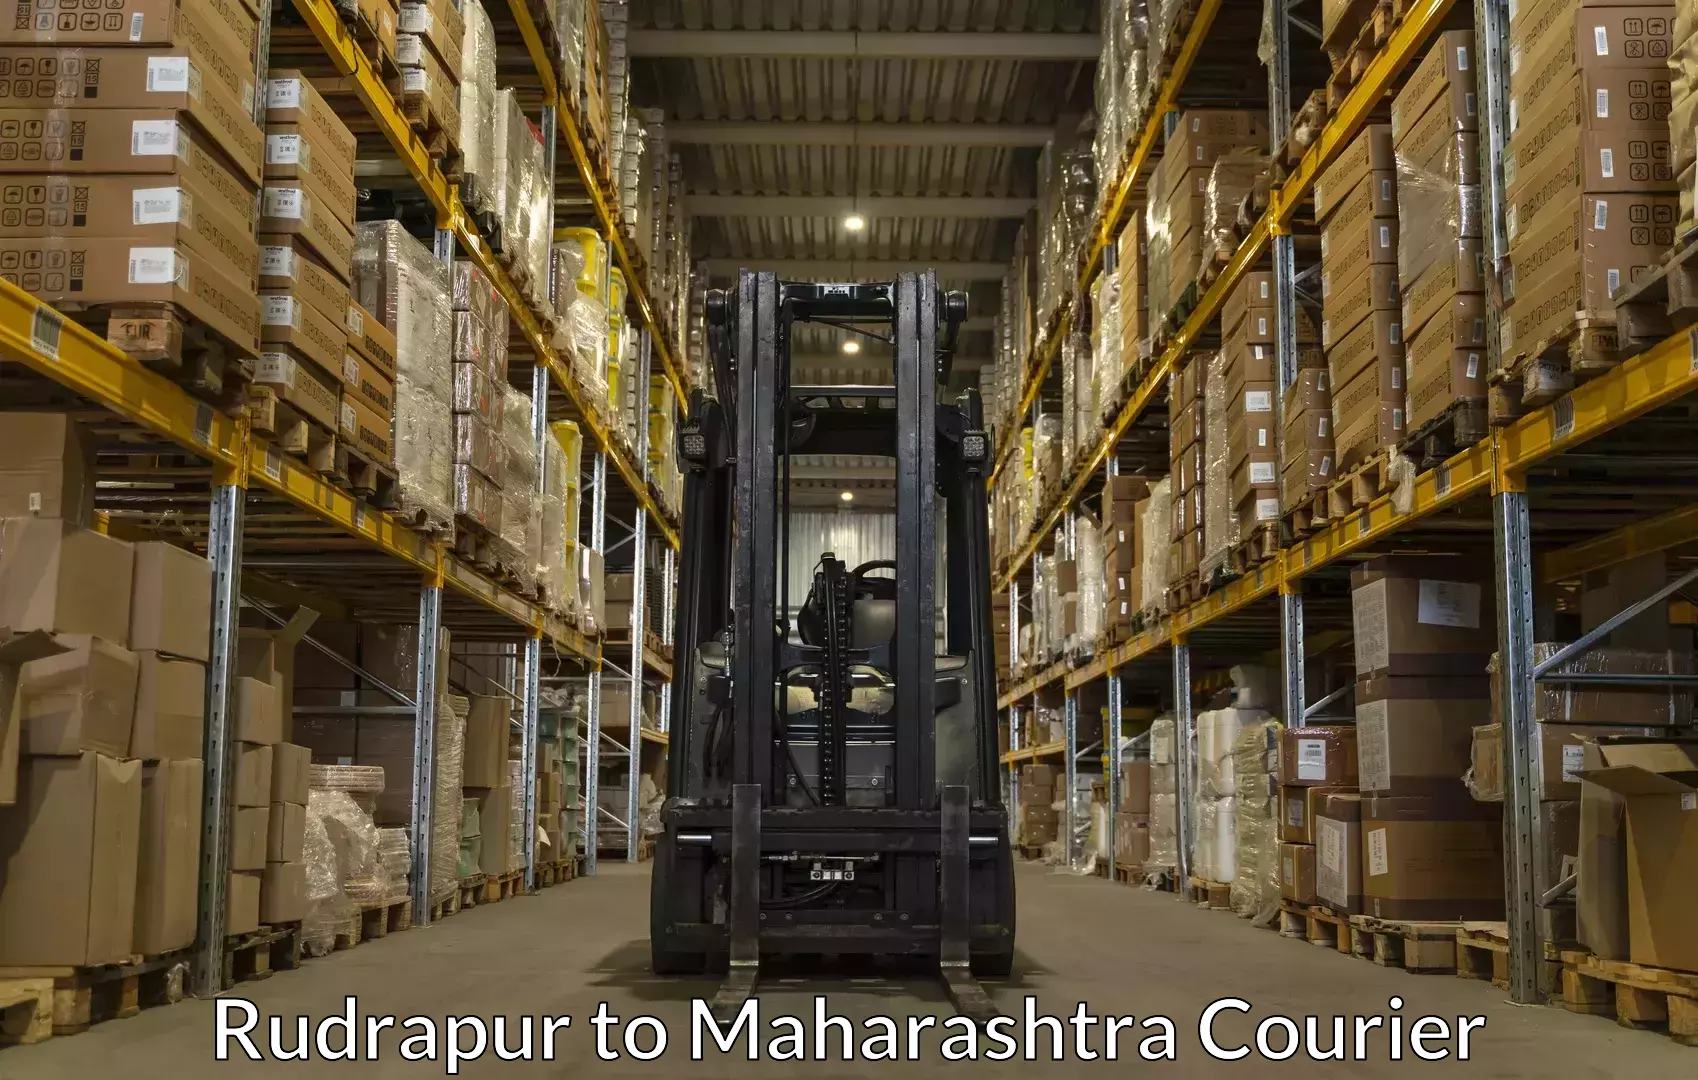 Luggage delivery system Rudrapur to Maharashtra